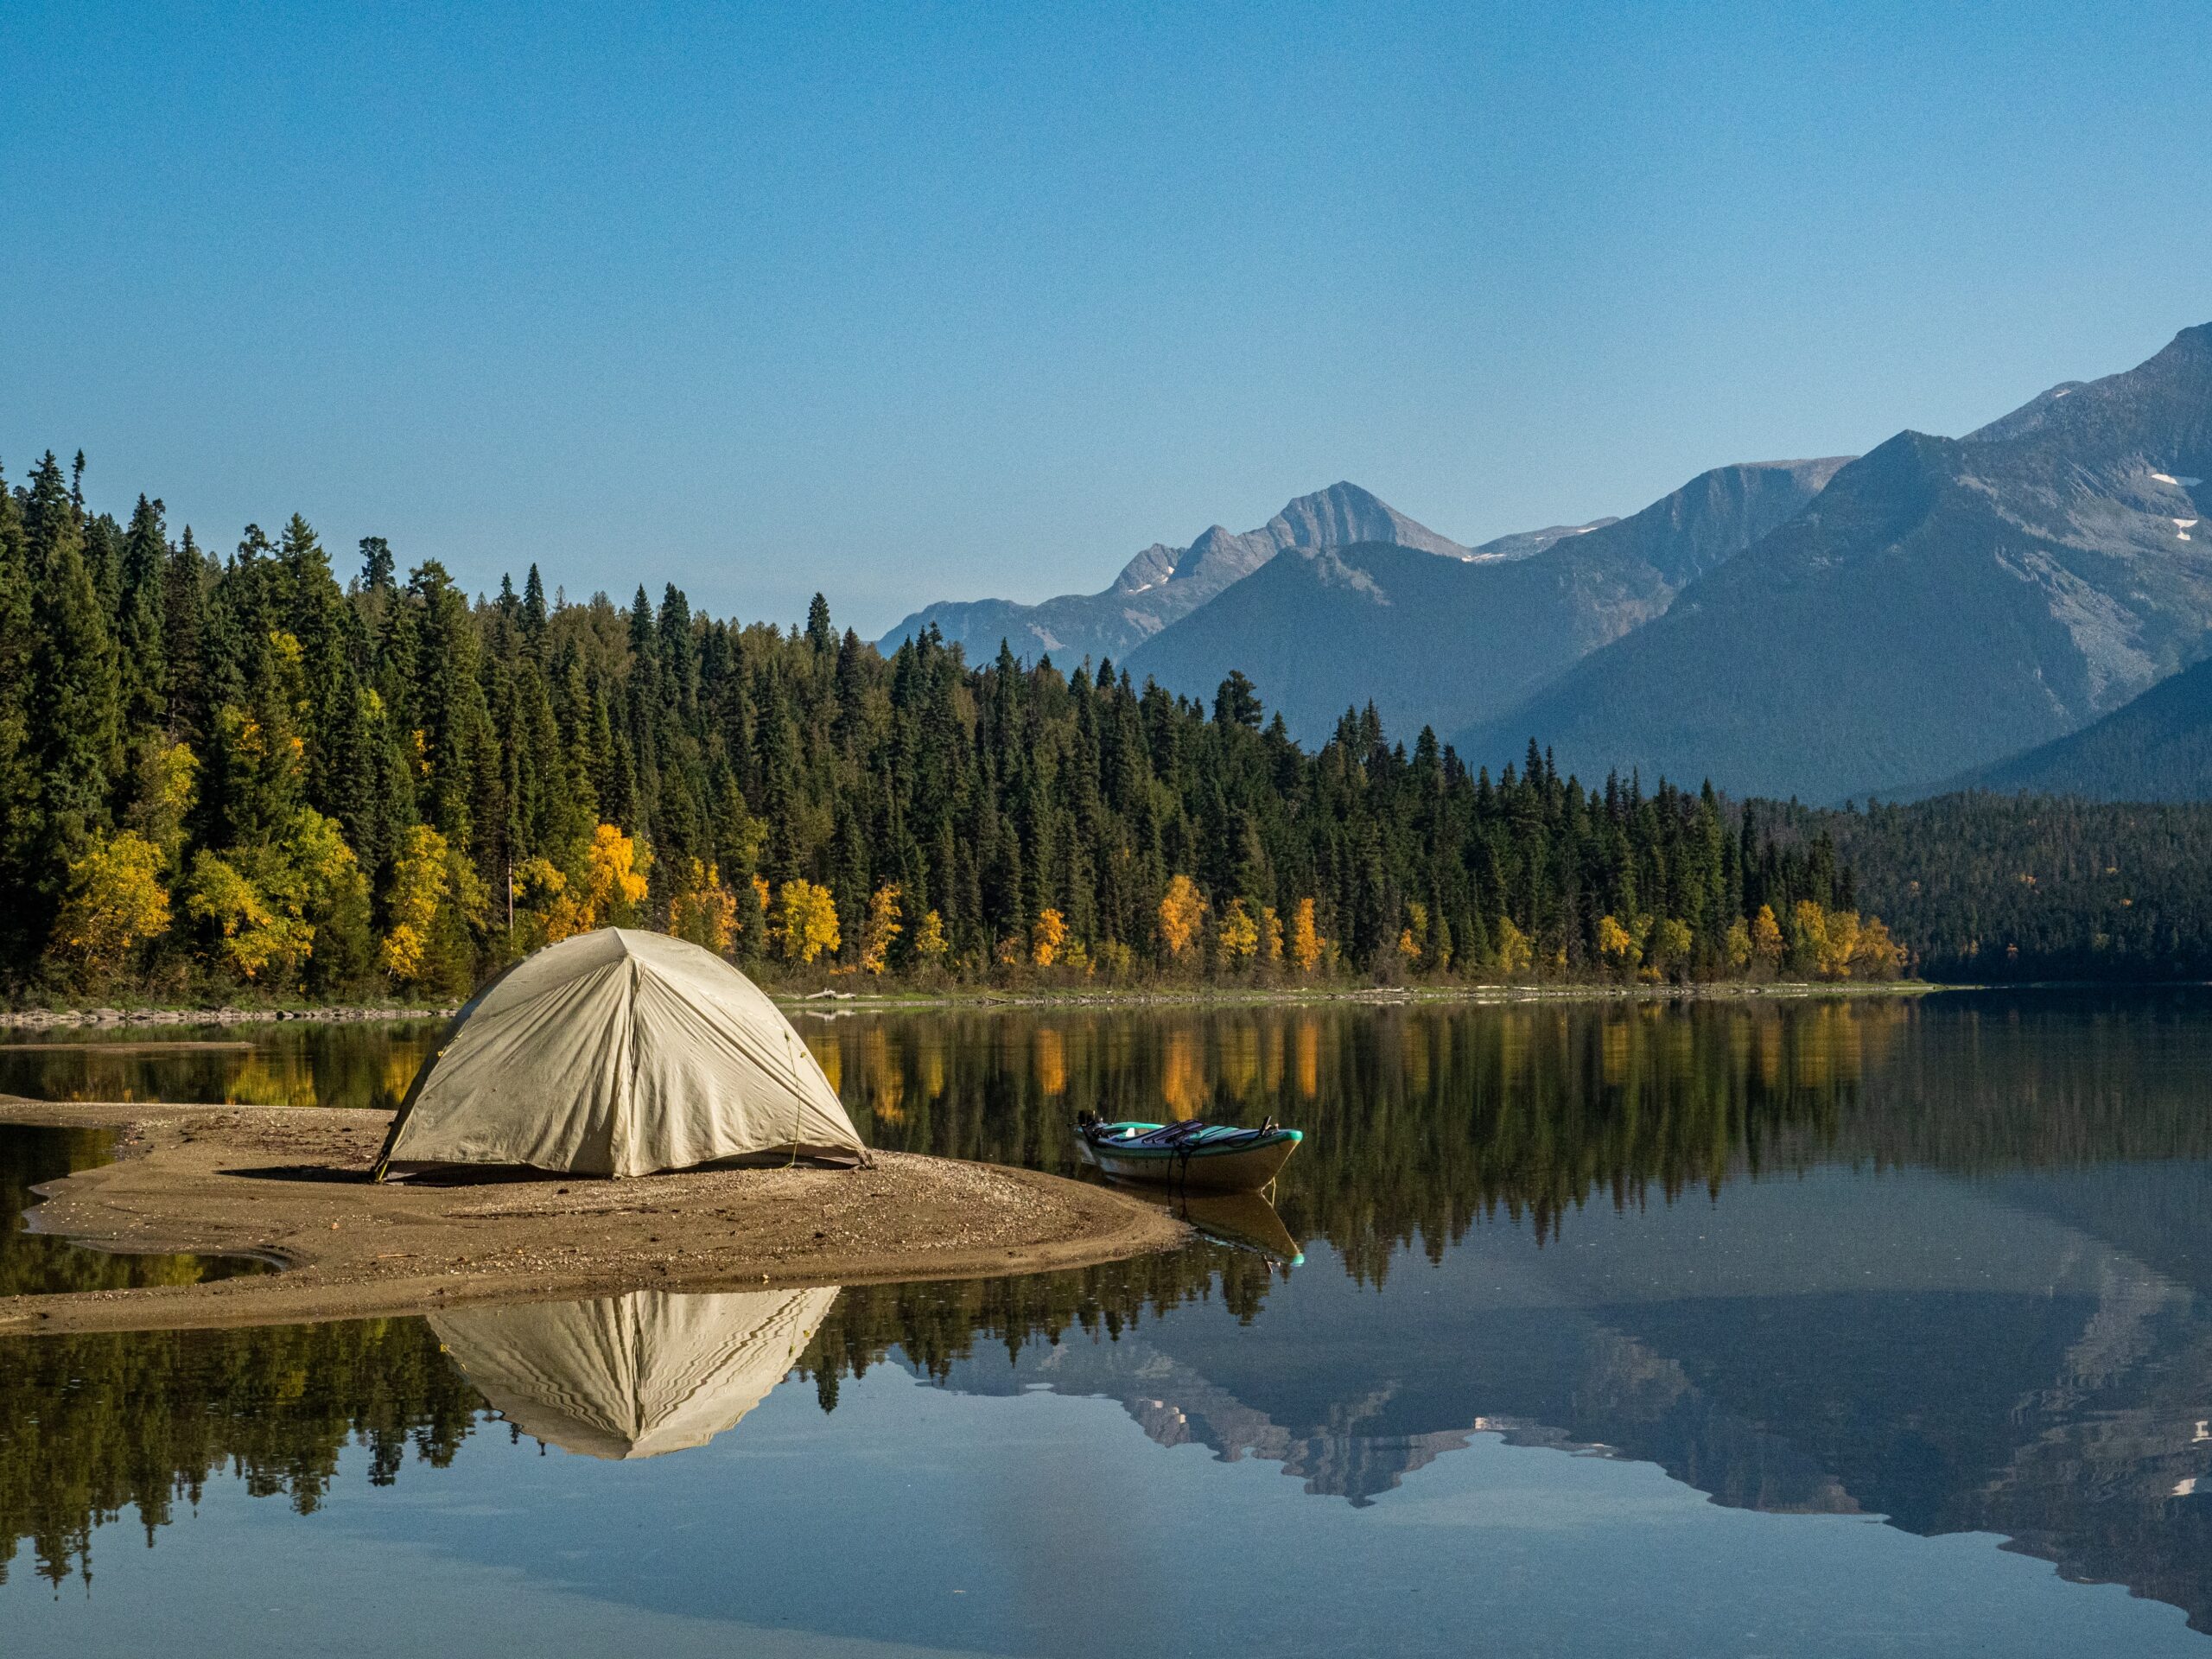 A tent near a lake with mountains in the background. Photo by Lesly Derksen on Unsplash